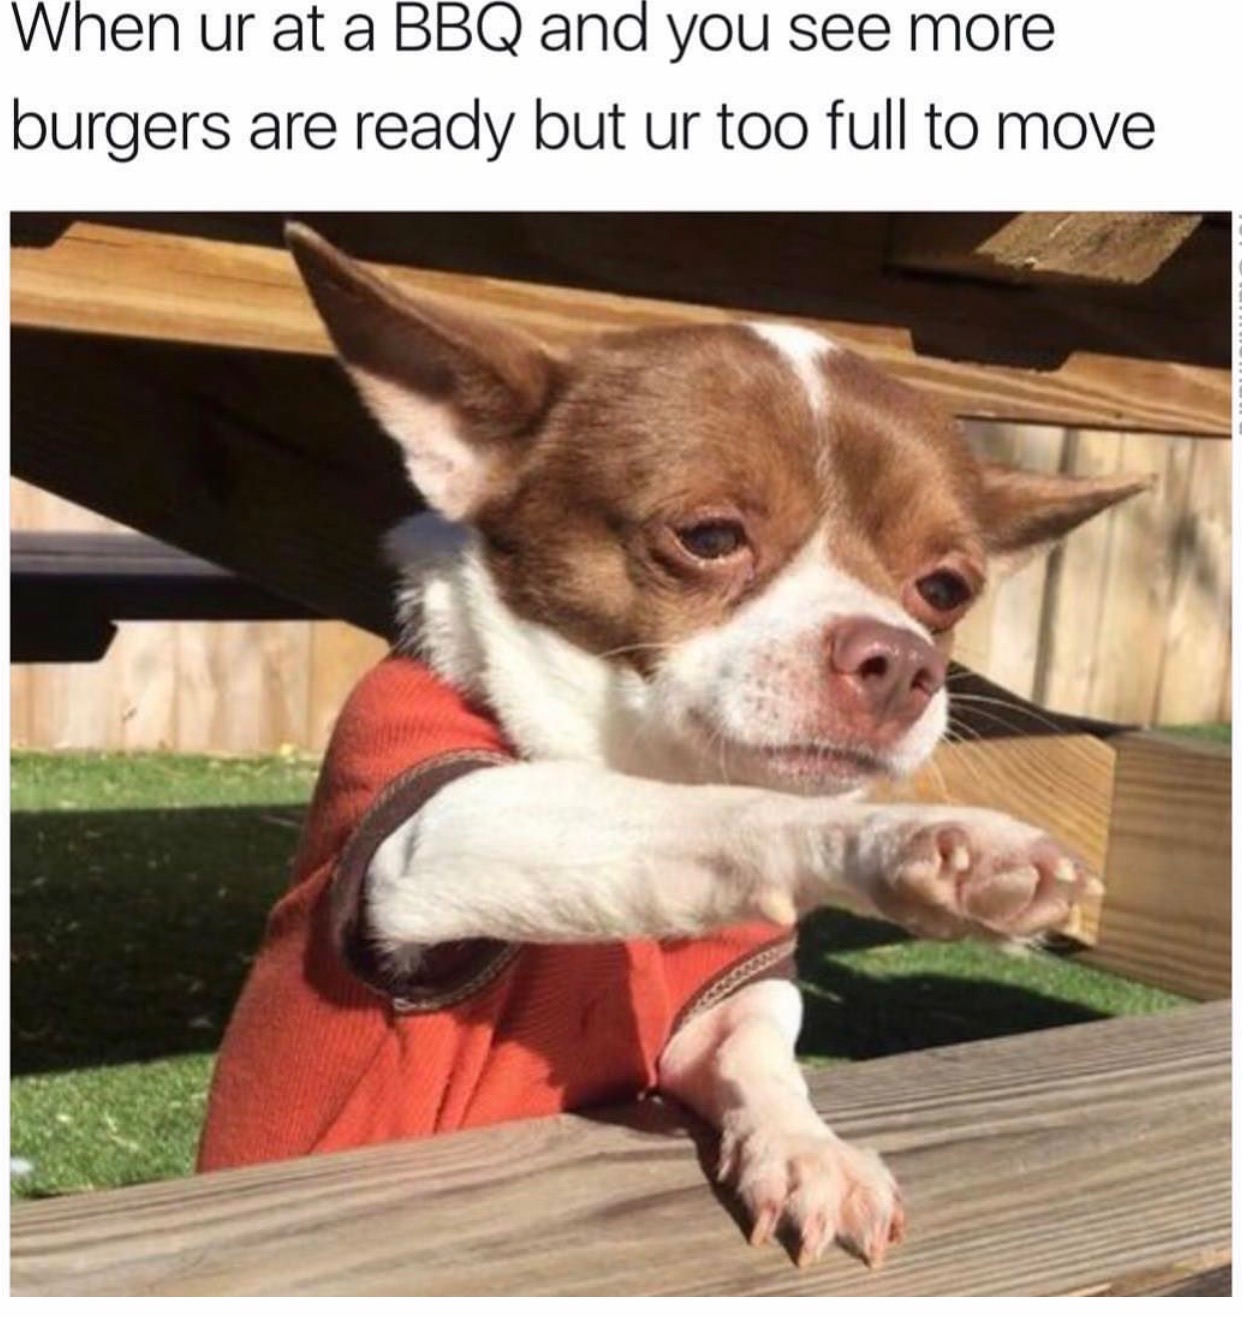 memes - boston terrier with burger - When ur at a Bbq and you see more burgers are ready but ur too full to move